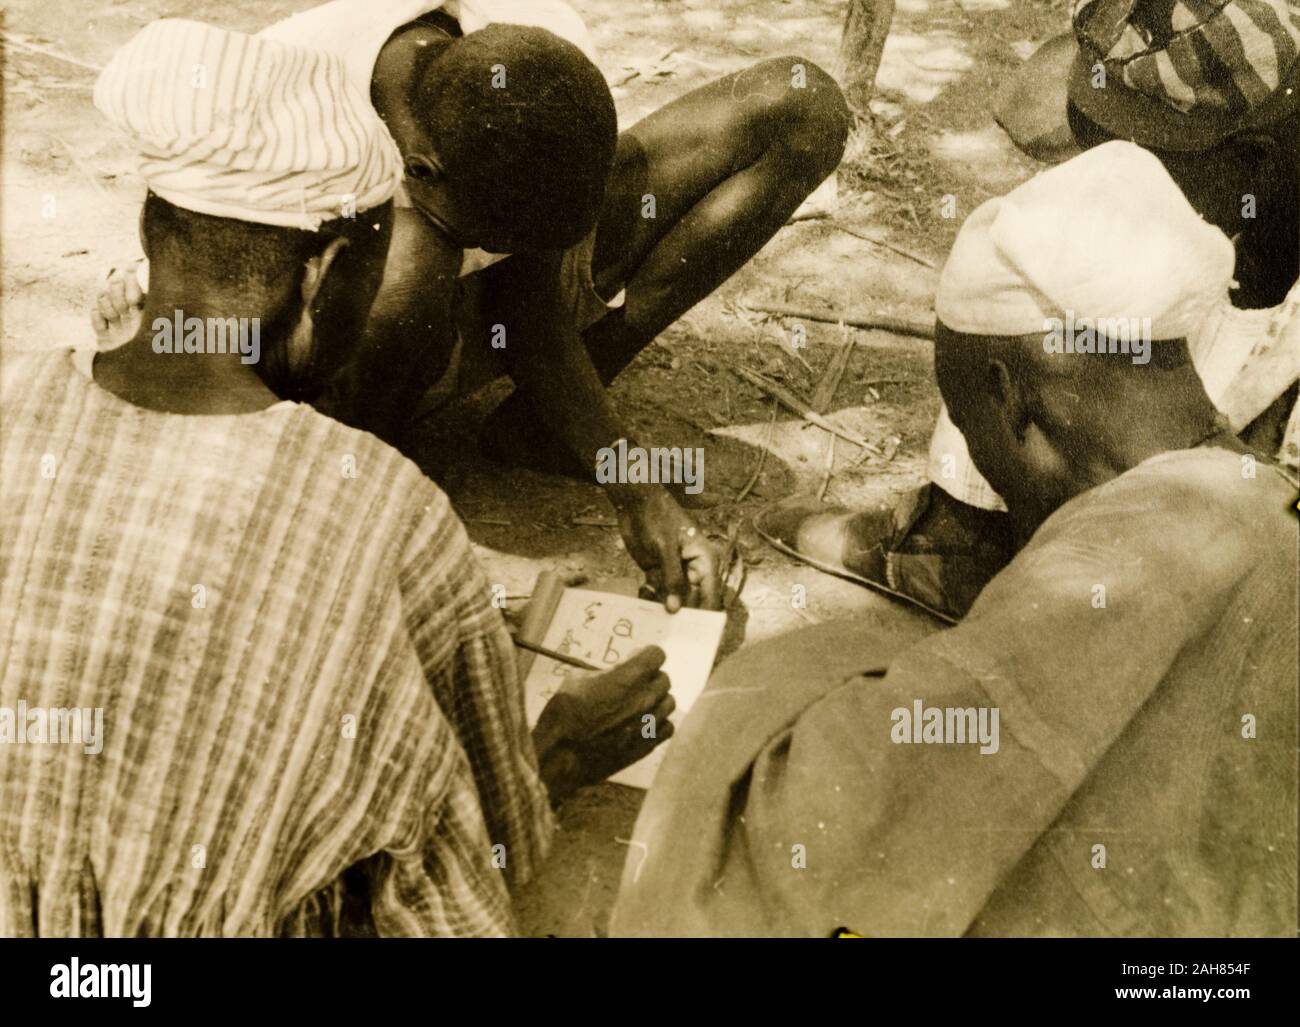 Gold CoastGhana, A student teacher helps men to read from a book during a literacy class; part of a mass literacy campaign launched by the British government in 1951 to improve literacy skills amongst African adults, both in their own languages and in English. Original manuscript caption: Mass literacy class. NTs [Northern Territories], 1951-52. 1995/076/5/2/2/36. Stock Photo